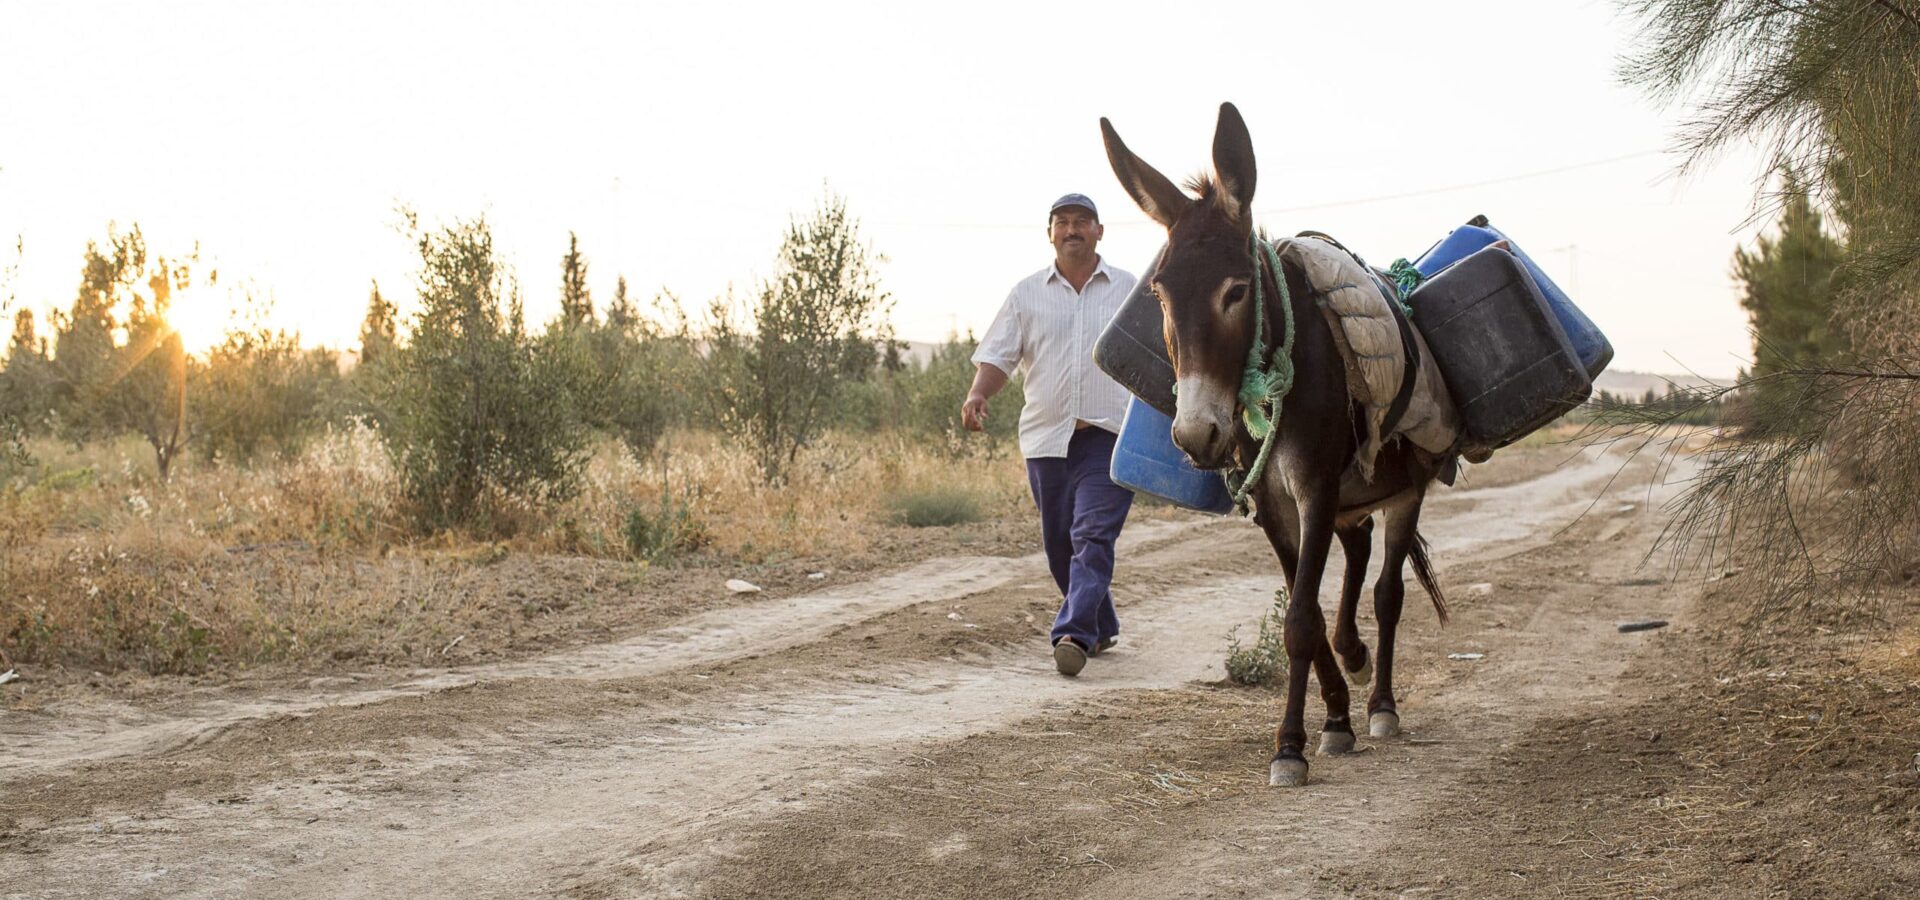 Donkey carrying four large containers with a man wearing a white shirt walking alongside it